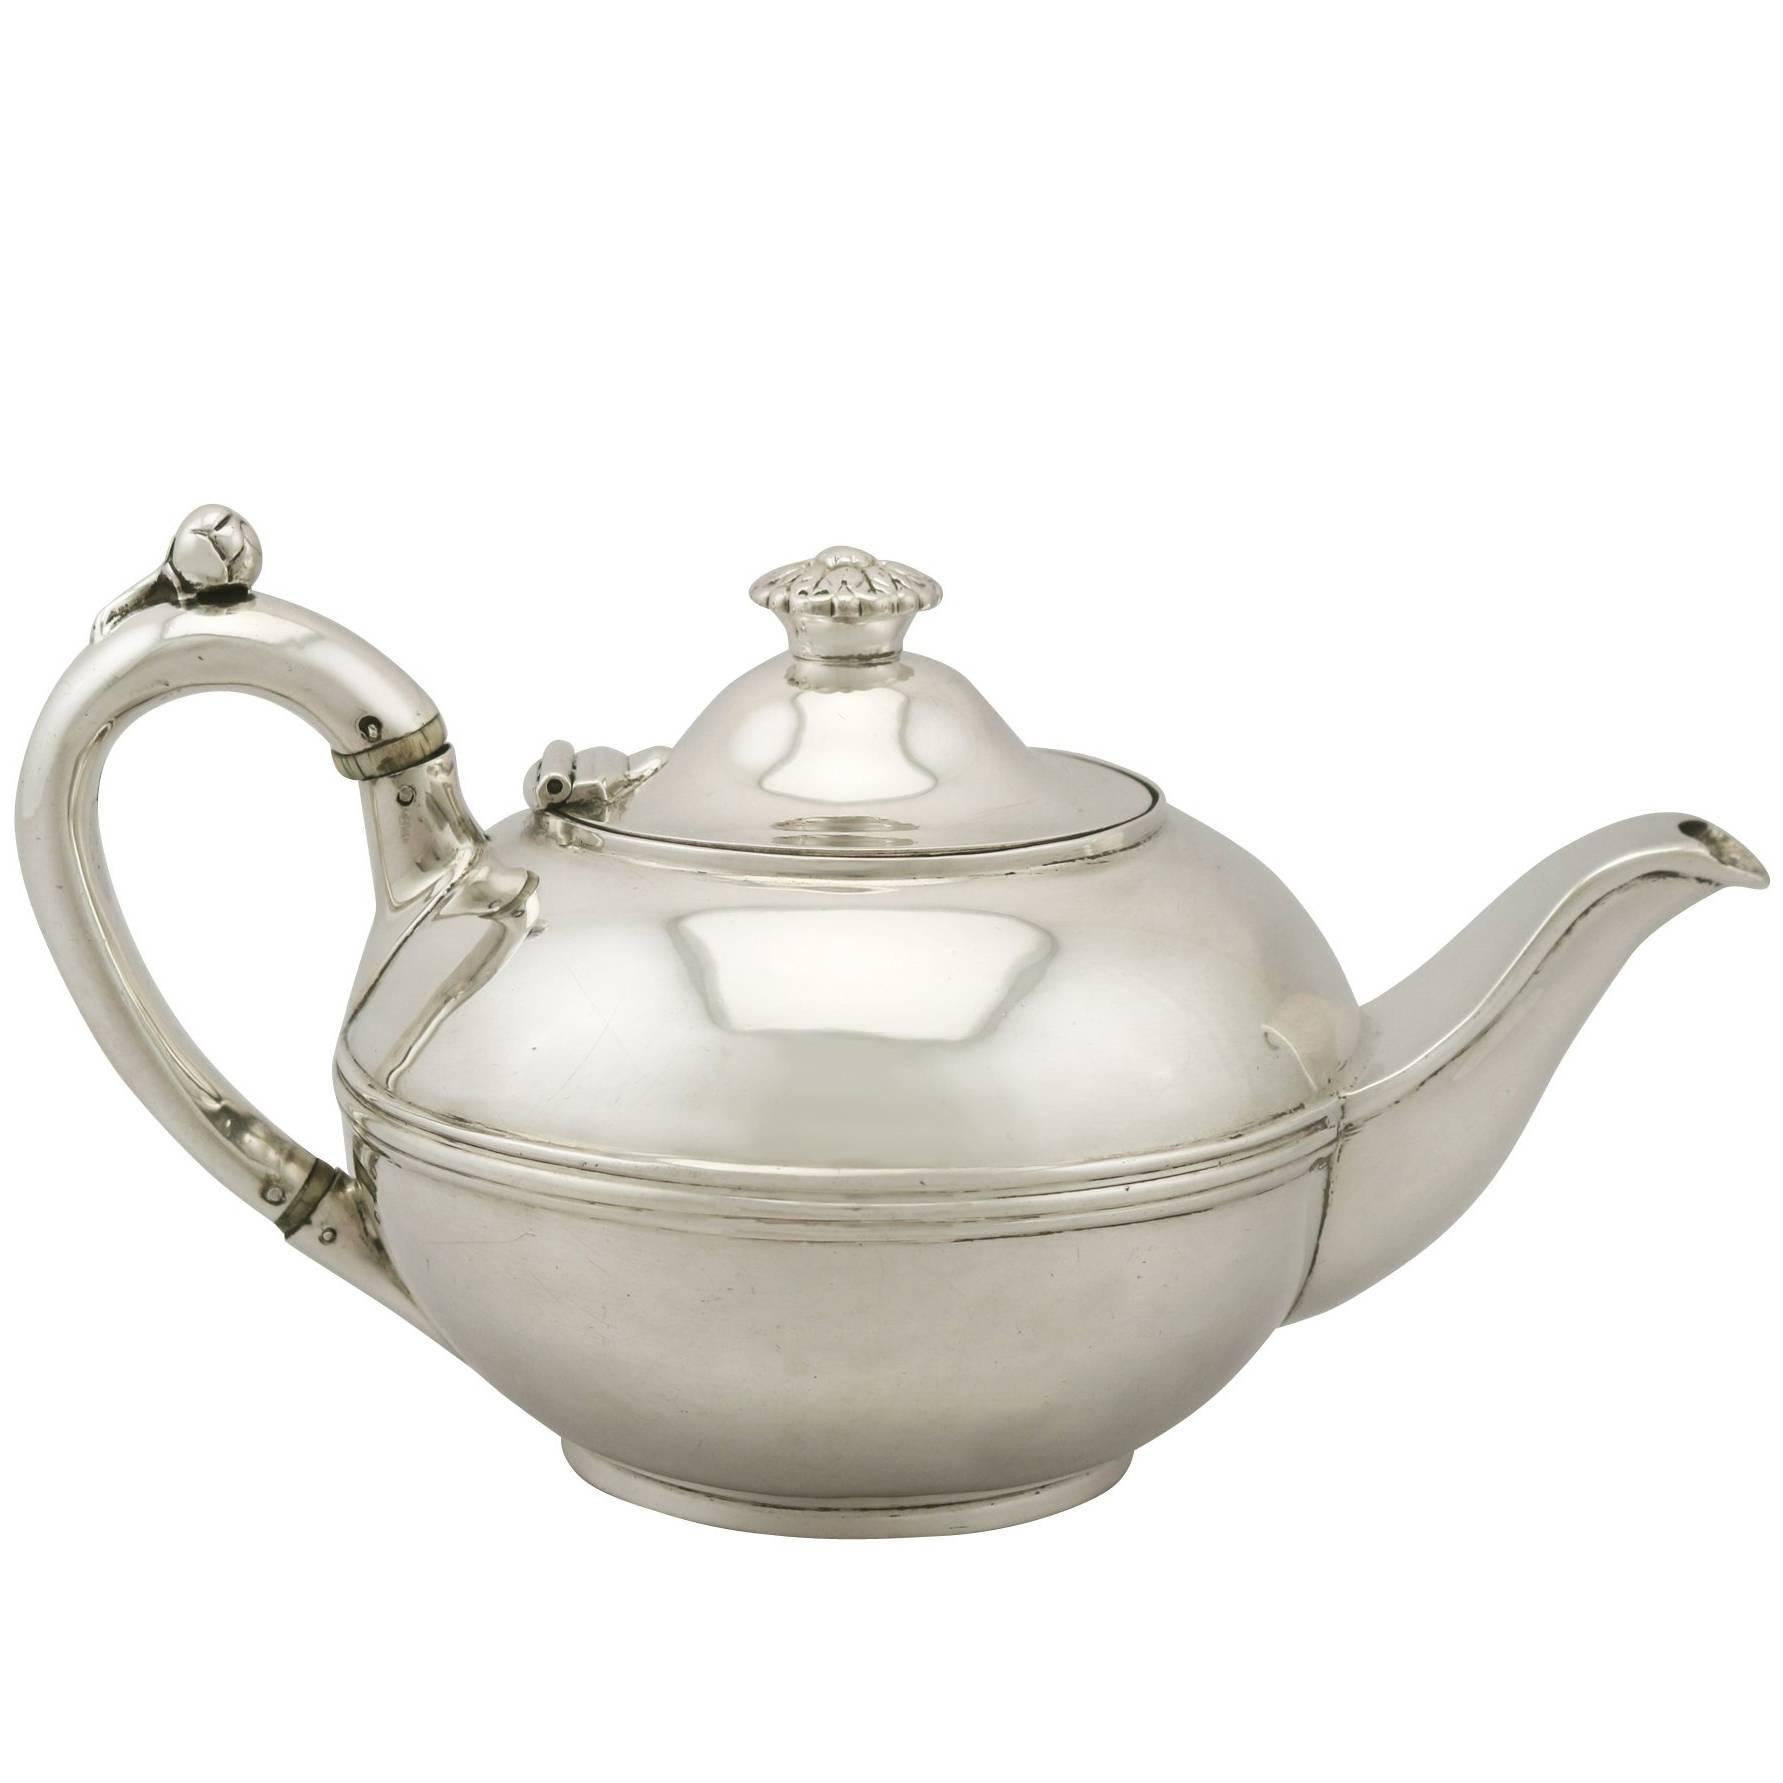 Antique George IV Sterling Silver Teapot by Paul Storr